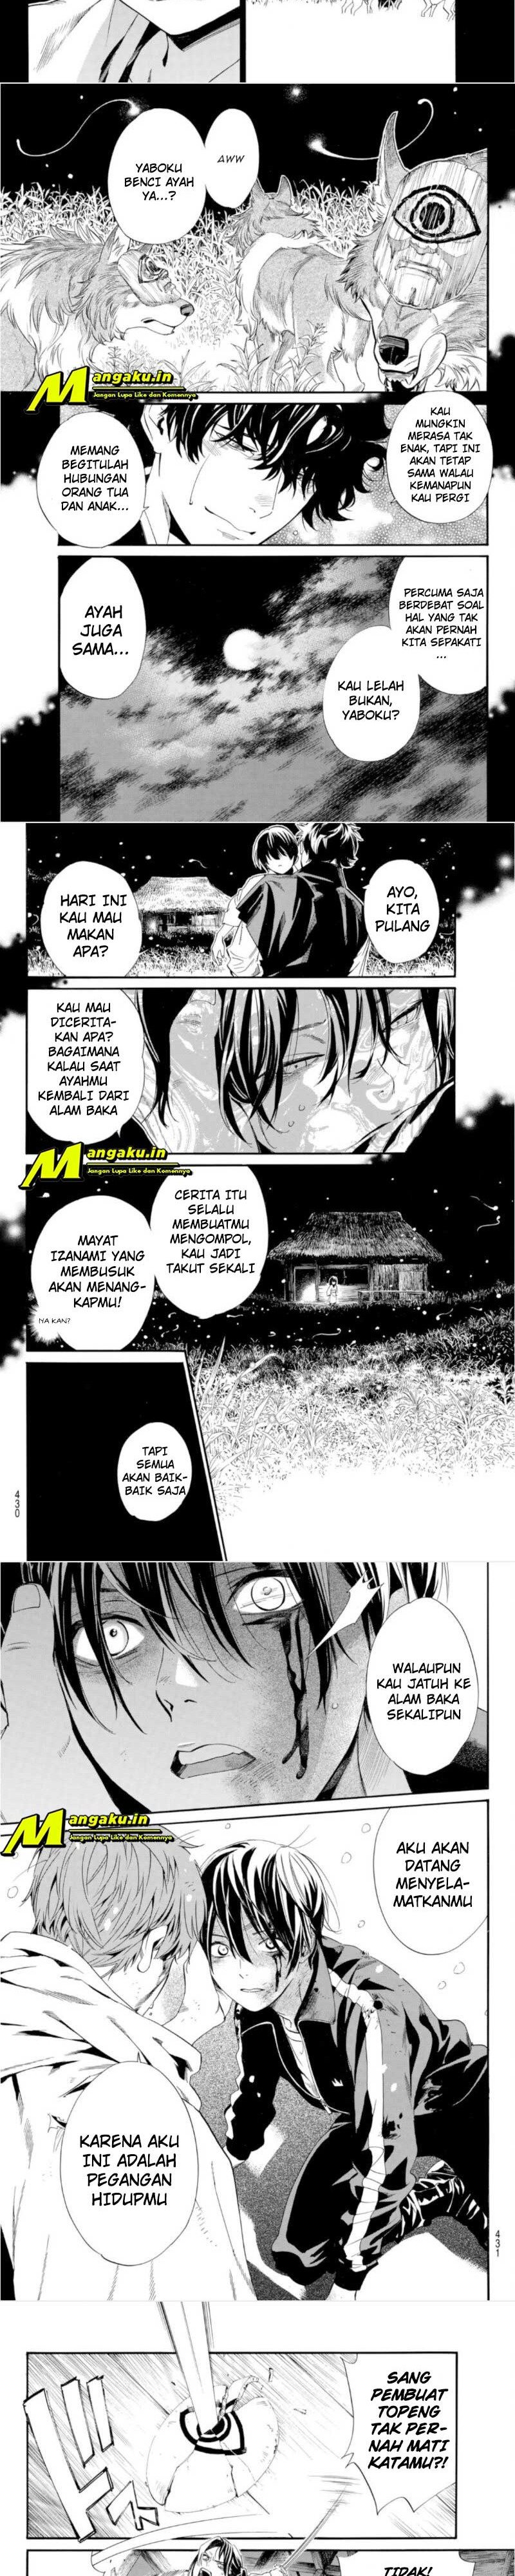 Noragami Chapter 102 - 49